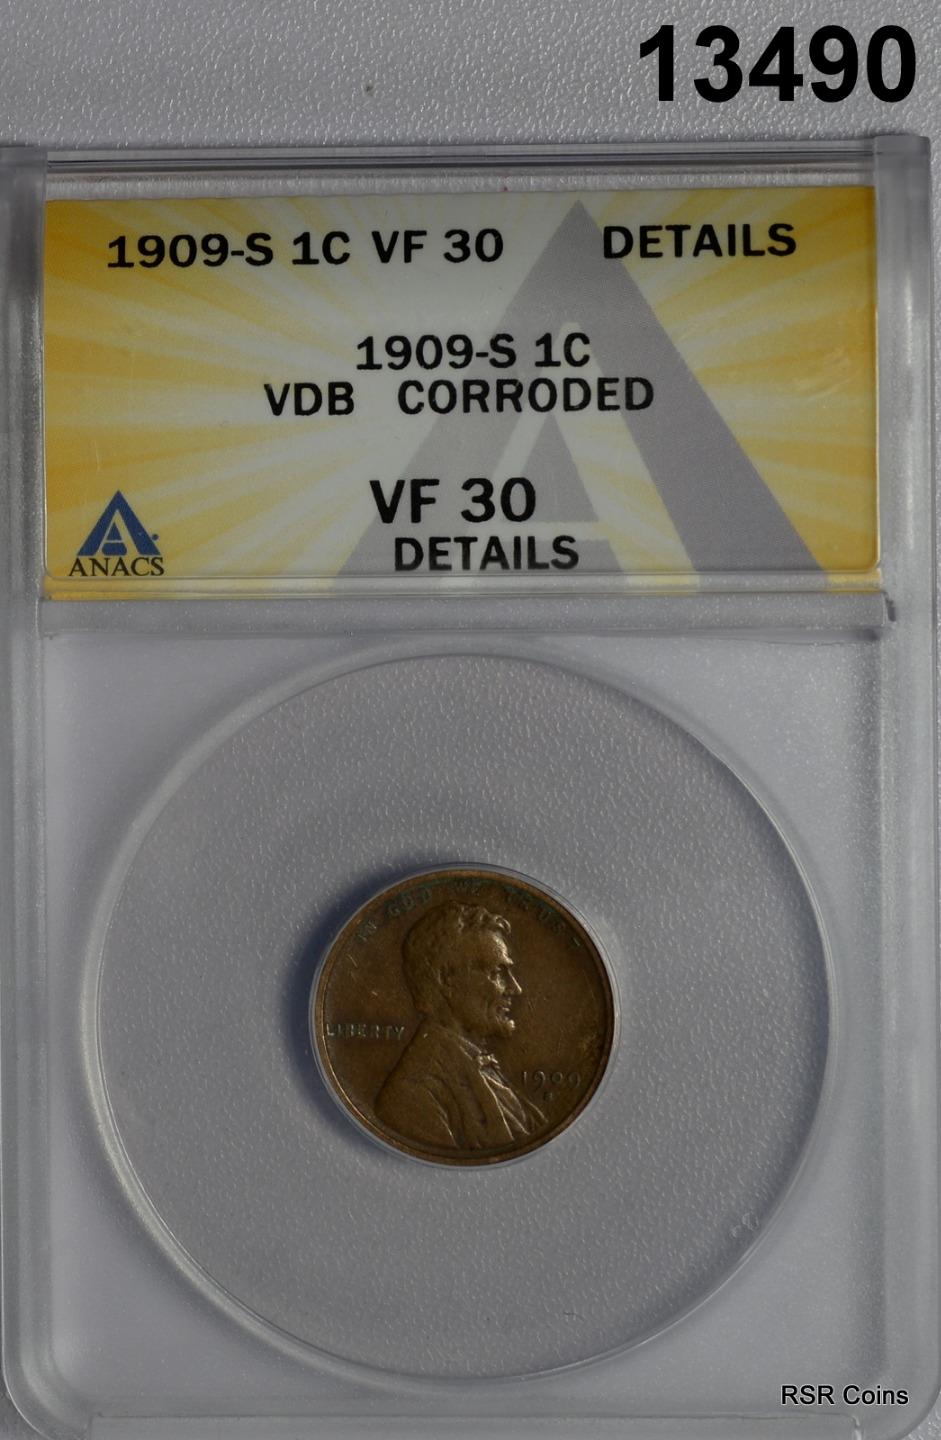 1909 S VDB LINCOLN CENT ANACS CERTIFIED VF30 CORRODED VERY MINOR! #13490